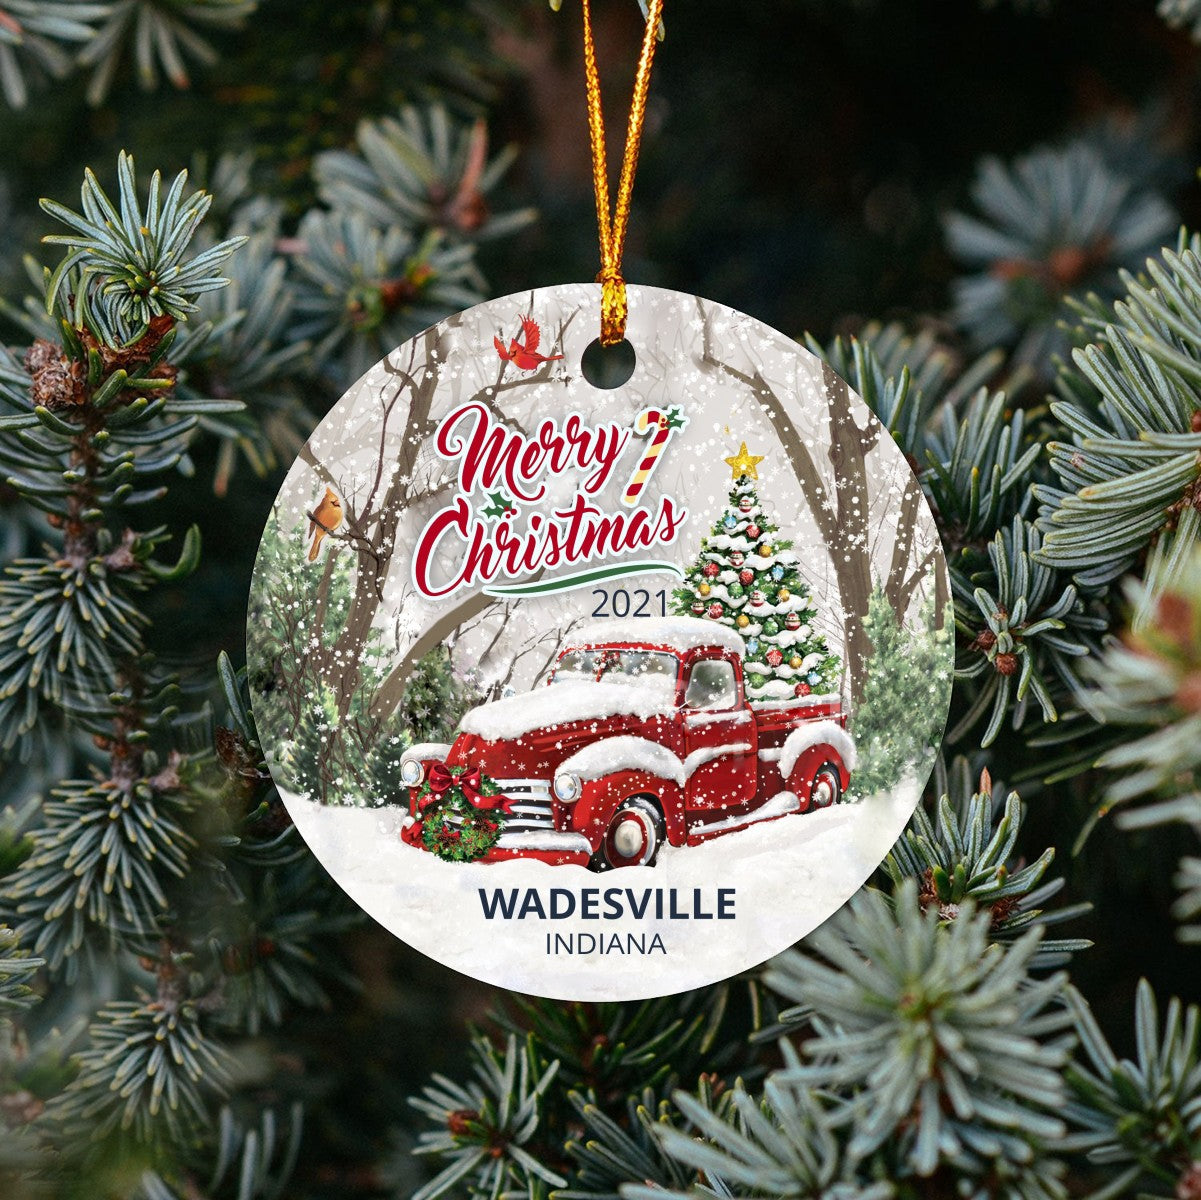 Christmas Tree Ornaments Wadesville - Ornament With Name City, State Wadesville Indiana IN Ornament - Red Truck Xmas Ornaments 3'' Plastic Gift For Family, Friend And Housewarming